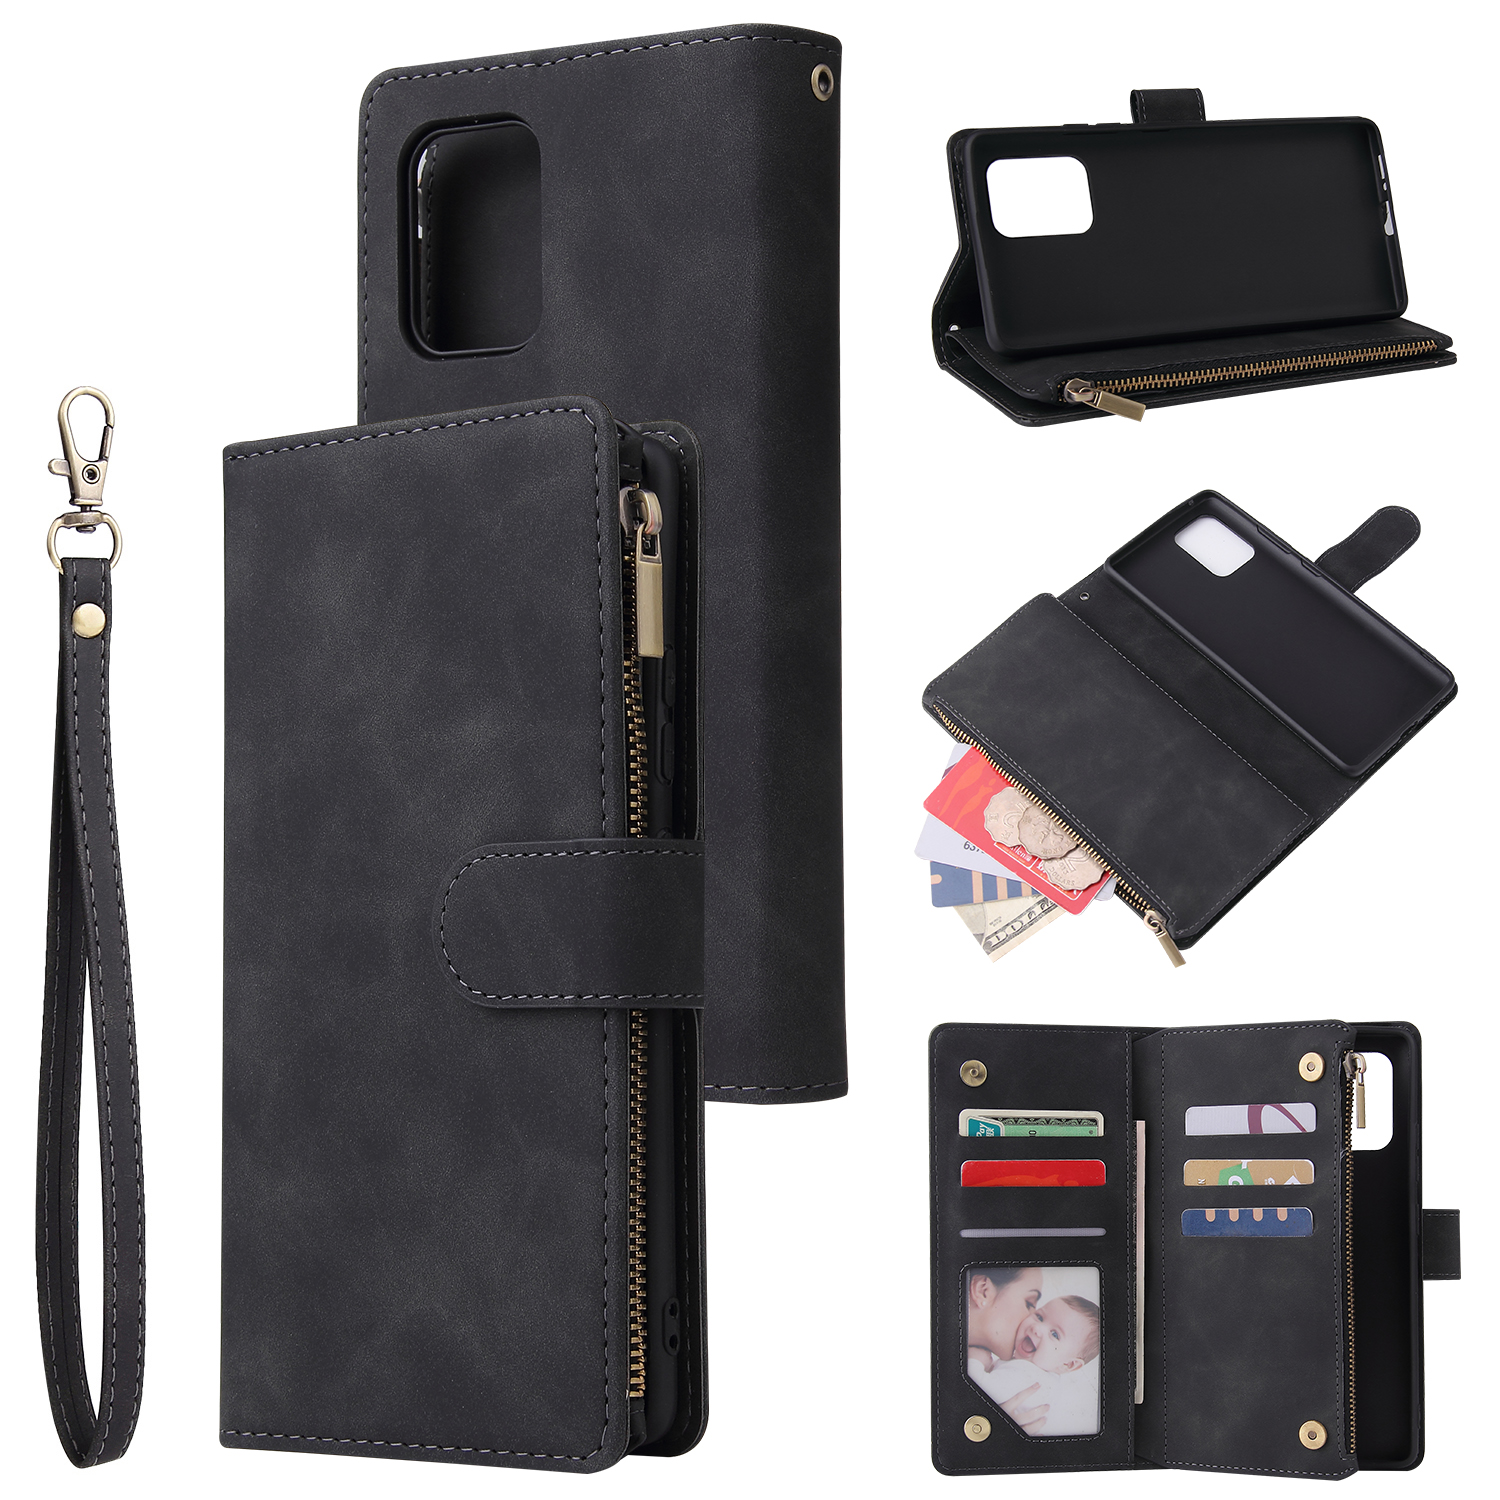 For Samsung S10 Lite 2020 Mobile Phone Case Wallet Design Zipper Closure Overall Protection Cellphone Cover  1 black